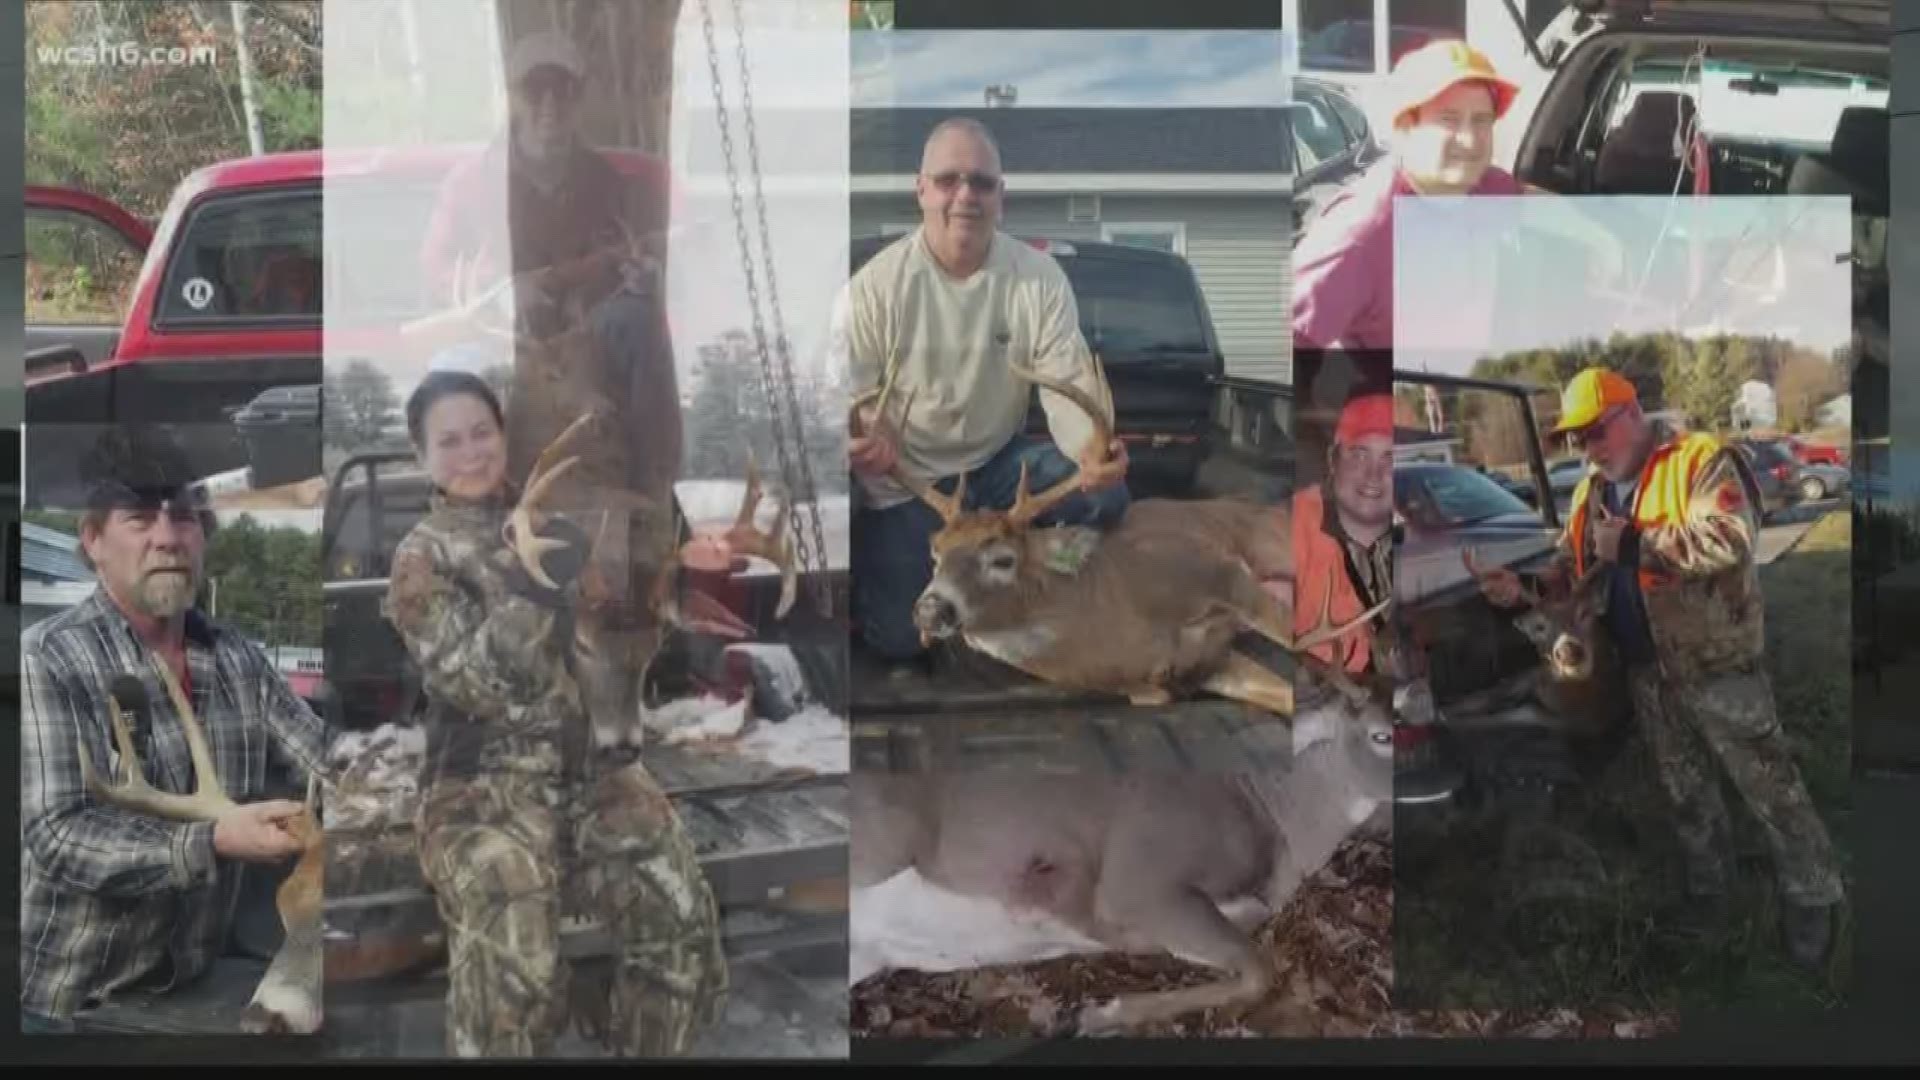 Least safe hunting season in a decade